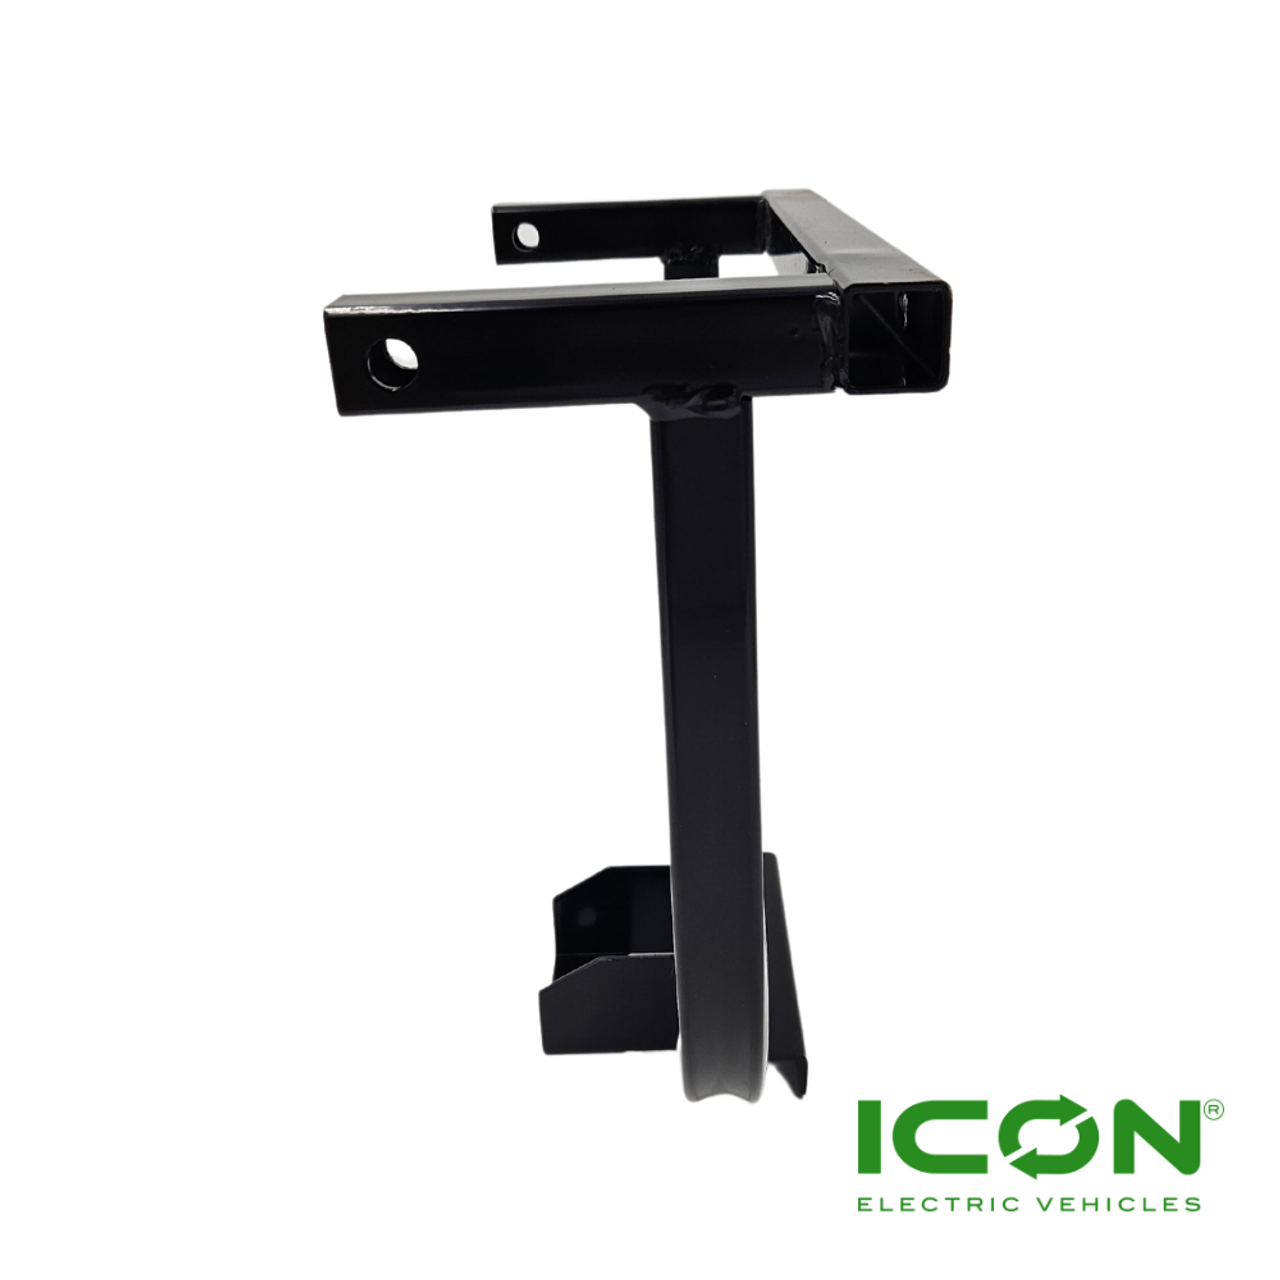 Front Brush Guard Internal Steel Frame for ICON Golf Carts, BD-834-IC, 2.01.004.040035, 2.03.103.100012